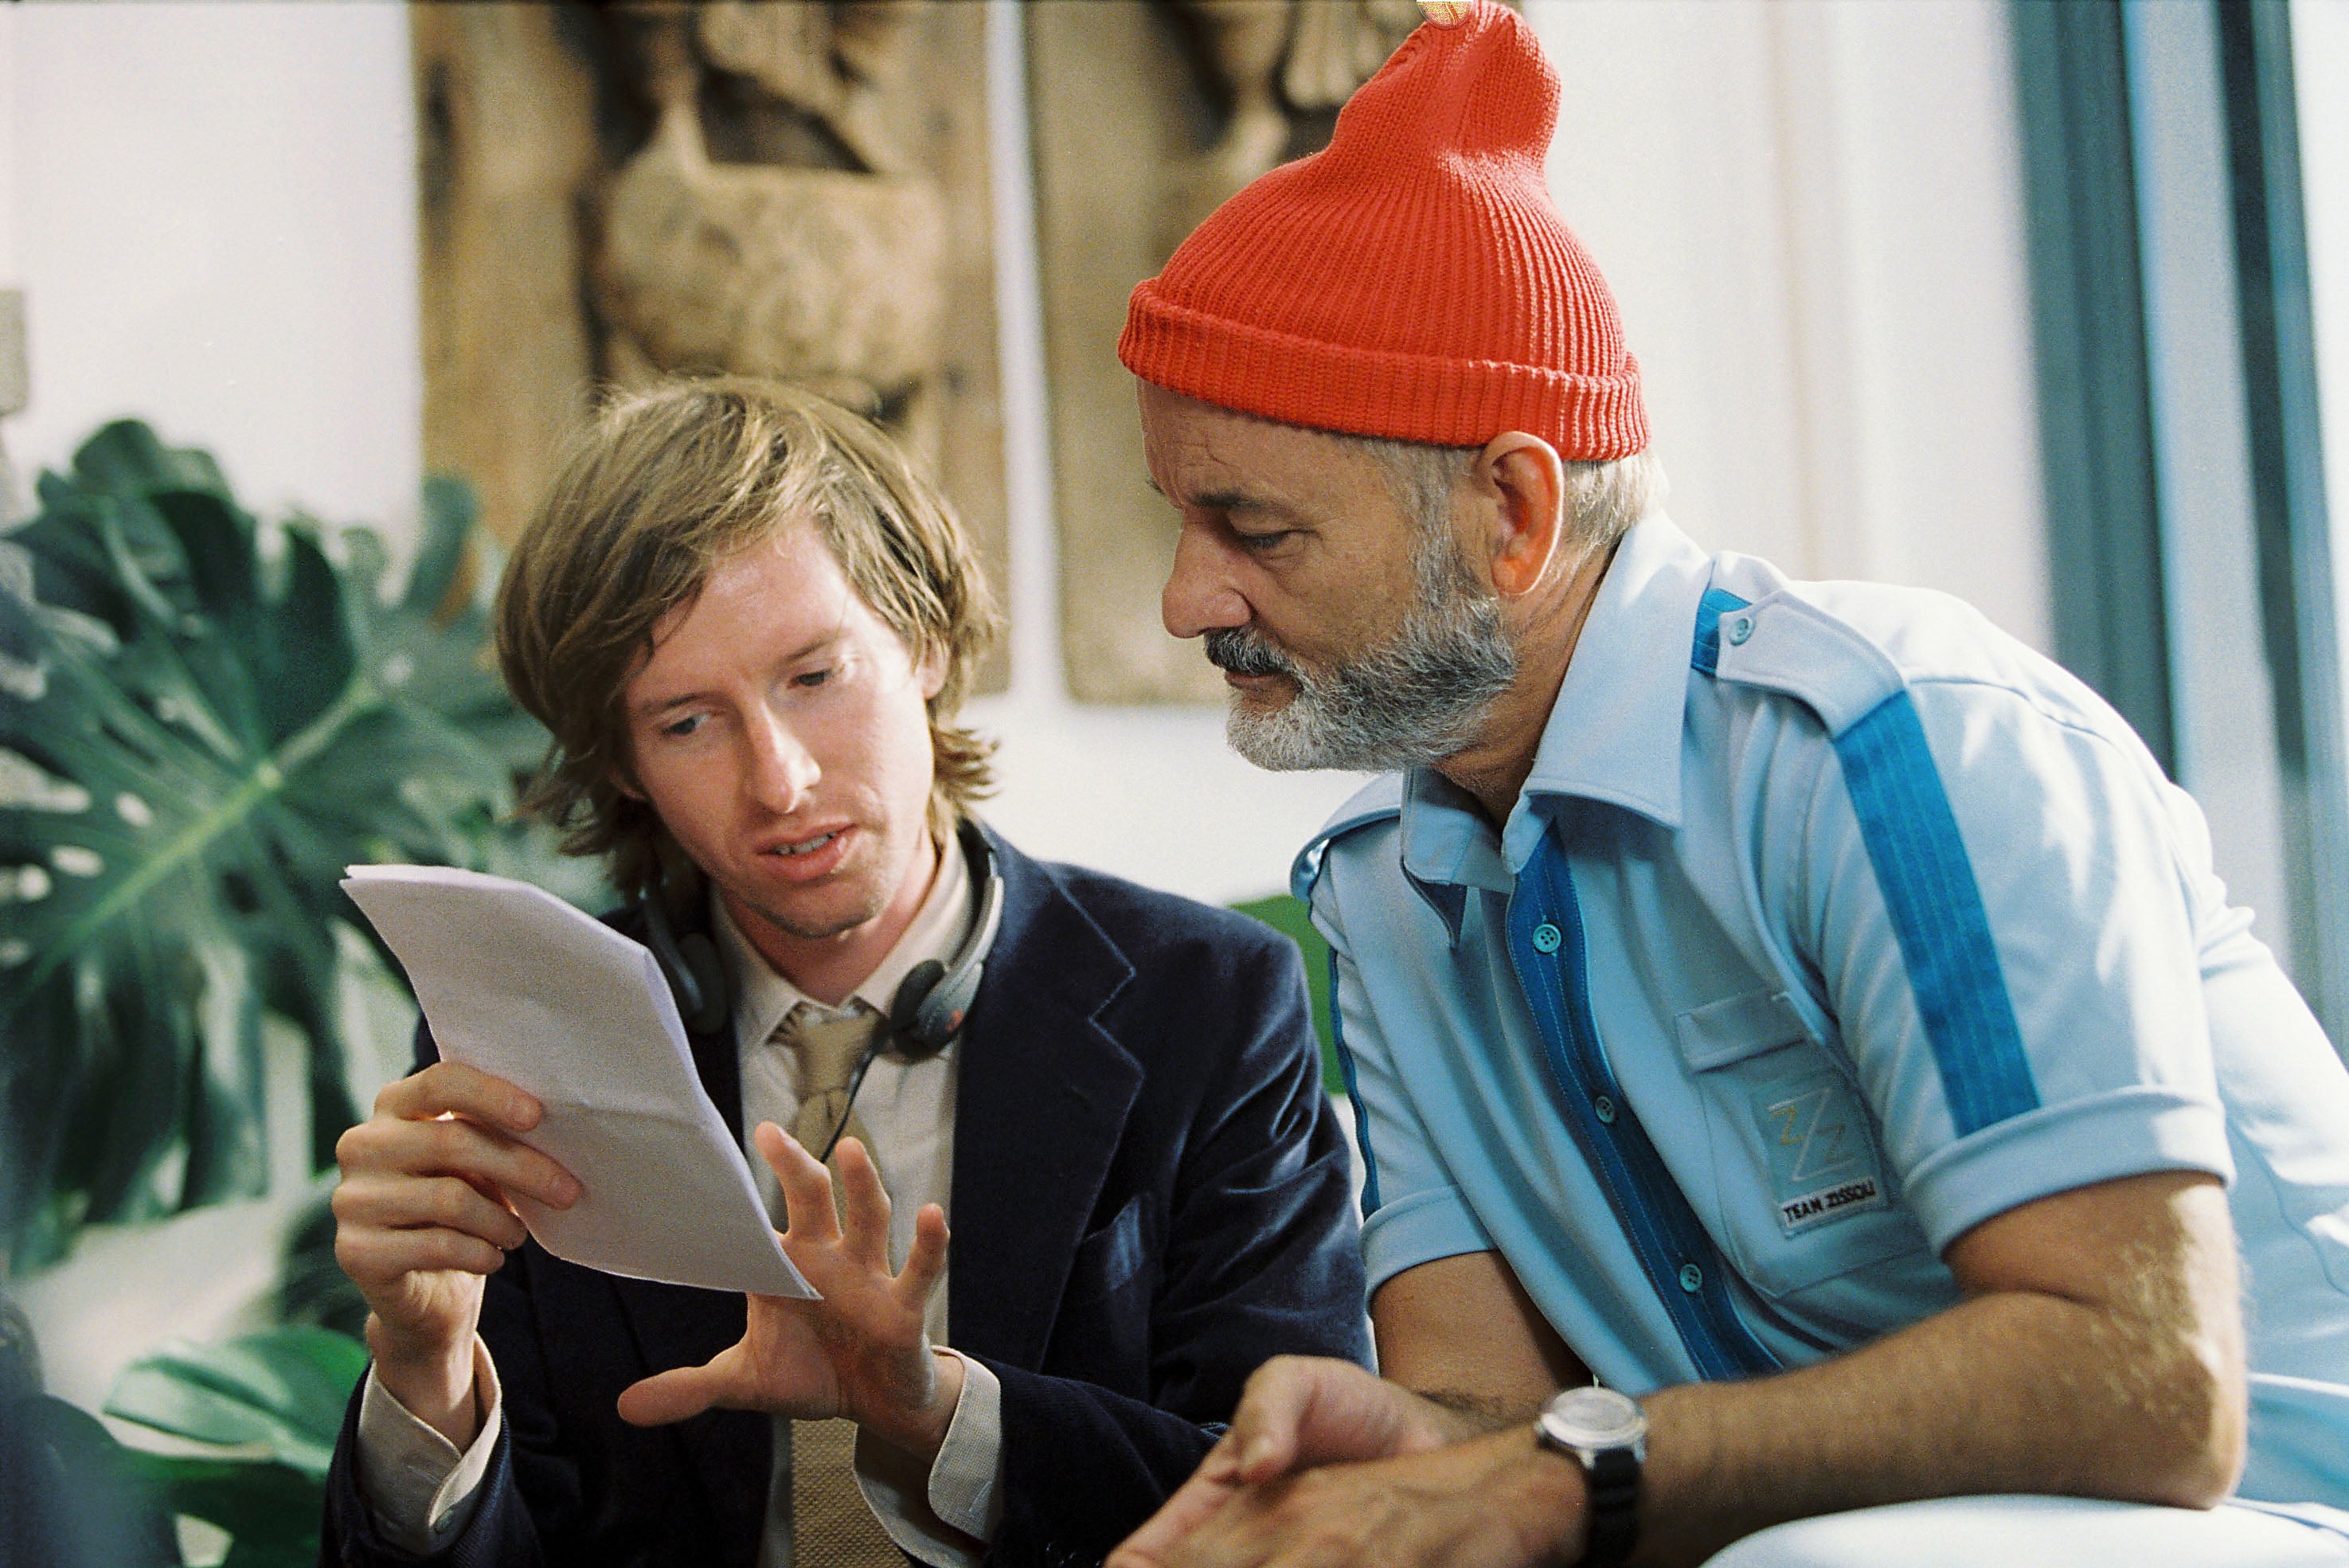 This New Fashion Line Makes You Feel Like You're in a Wes Anderson